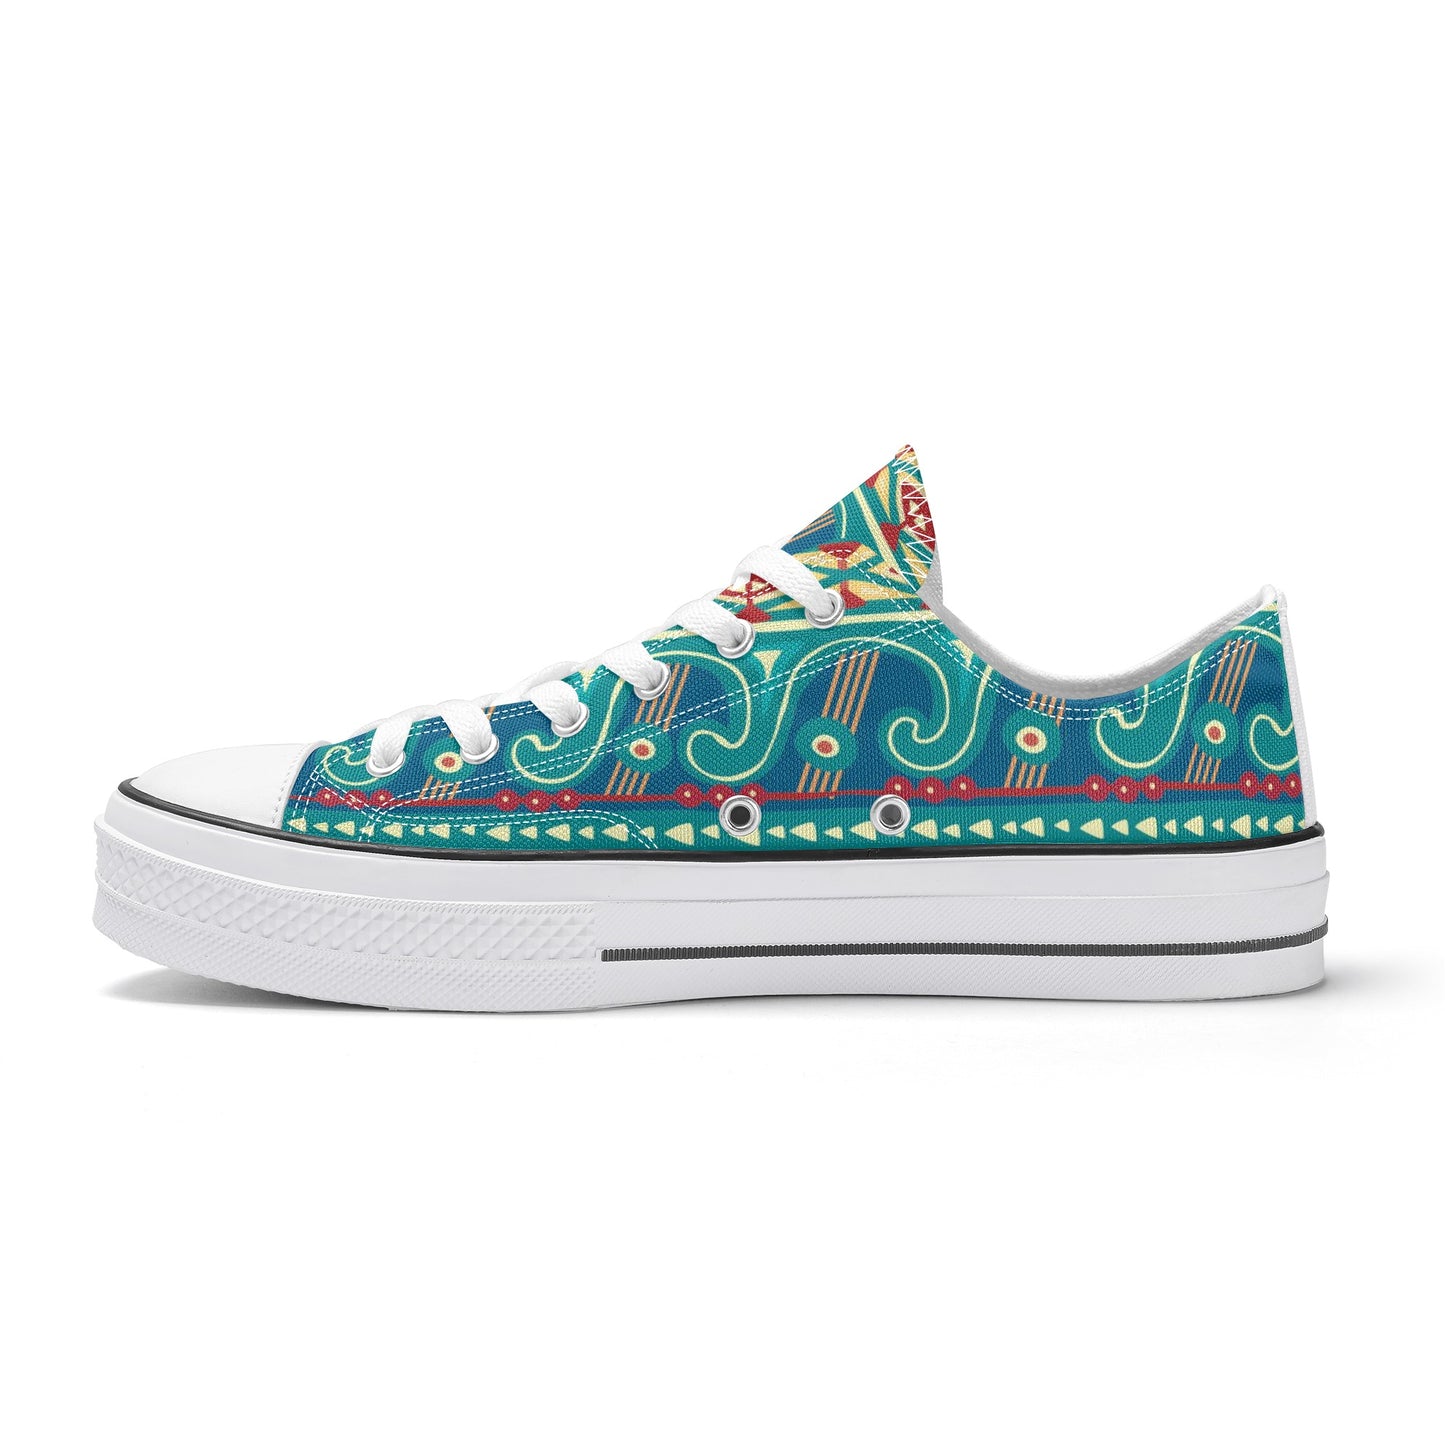 Teal Abstract Design Pattern - Mens Classic Low Top Canvas Shoes for Footwear Lovers